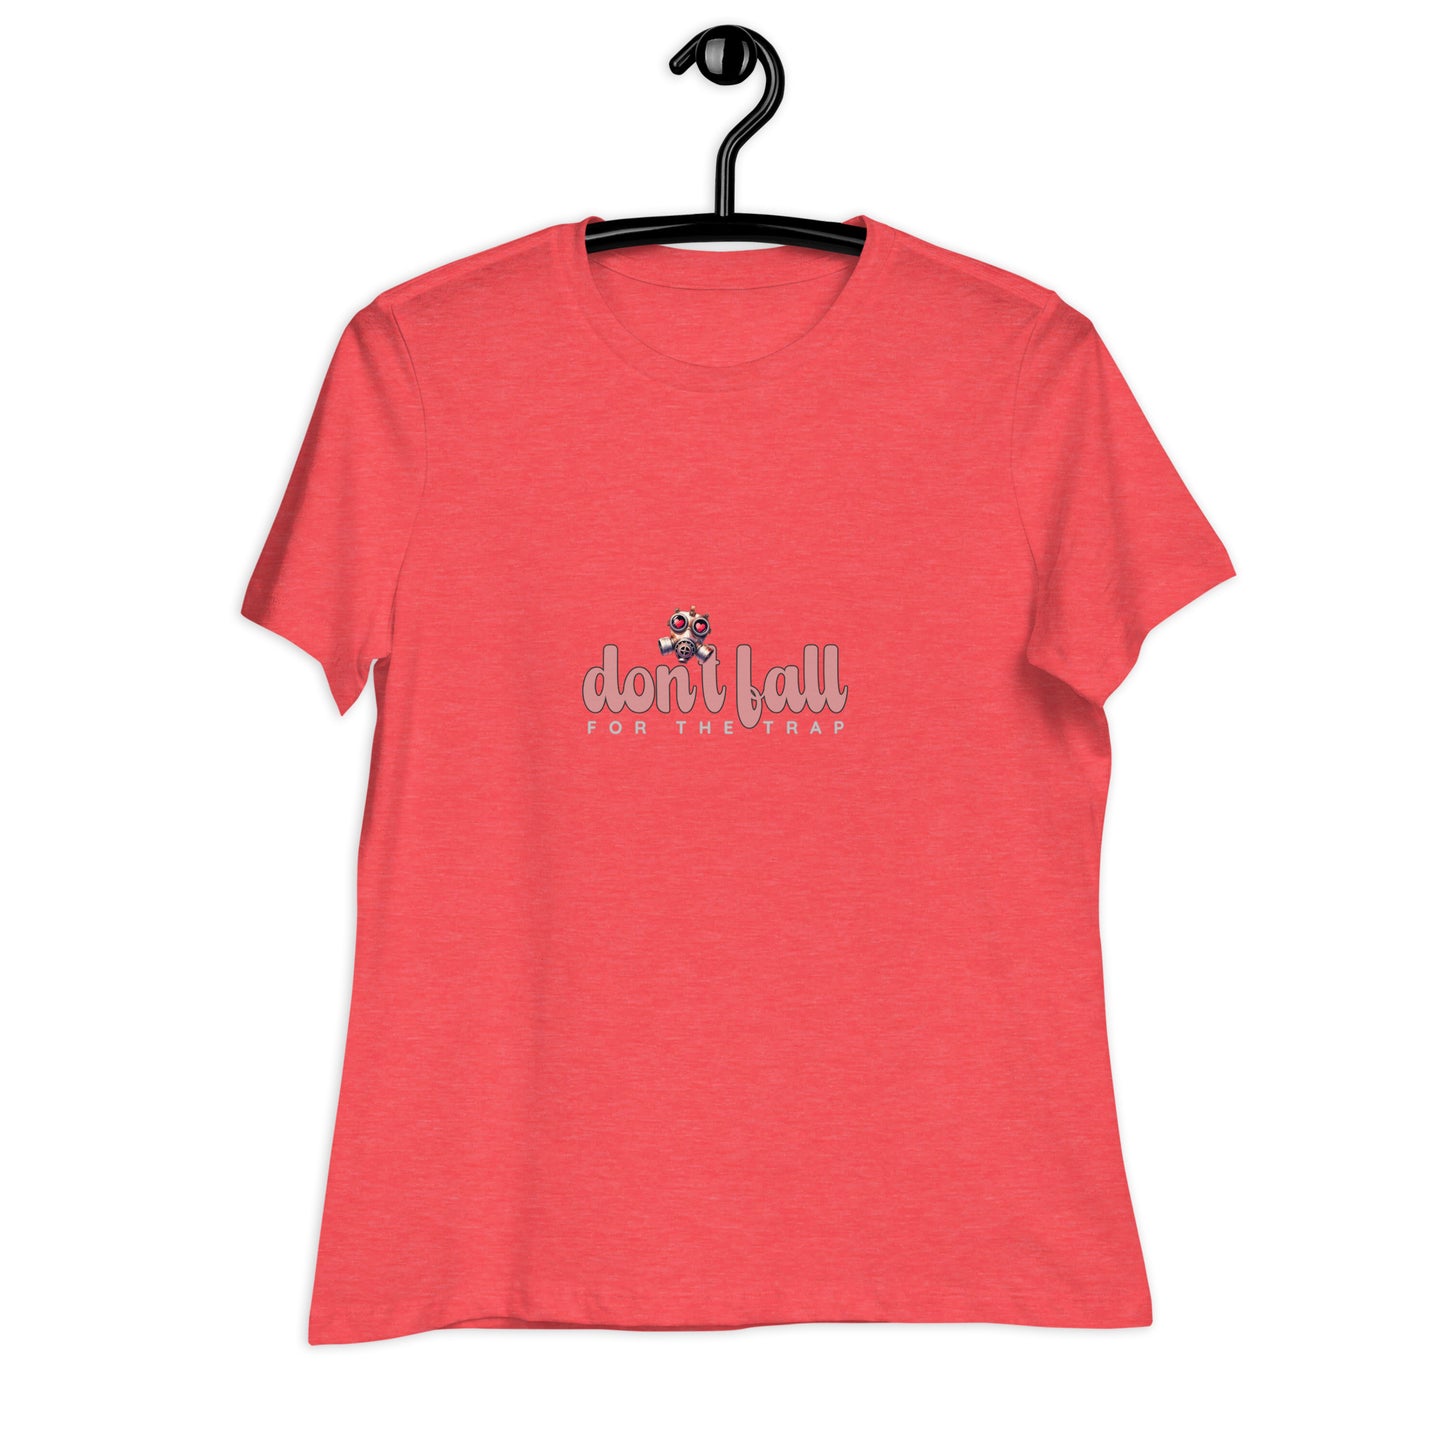 Don't Fall for the Trap Women's Relaxed T-Shirt